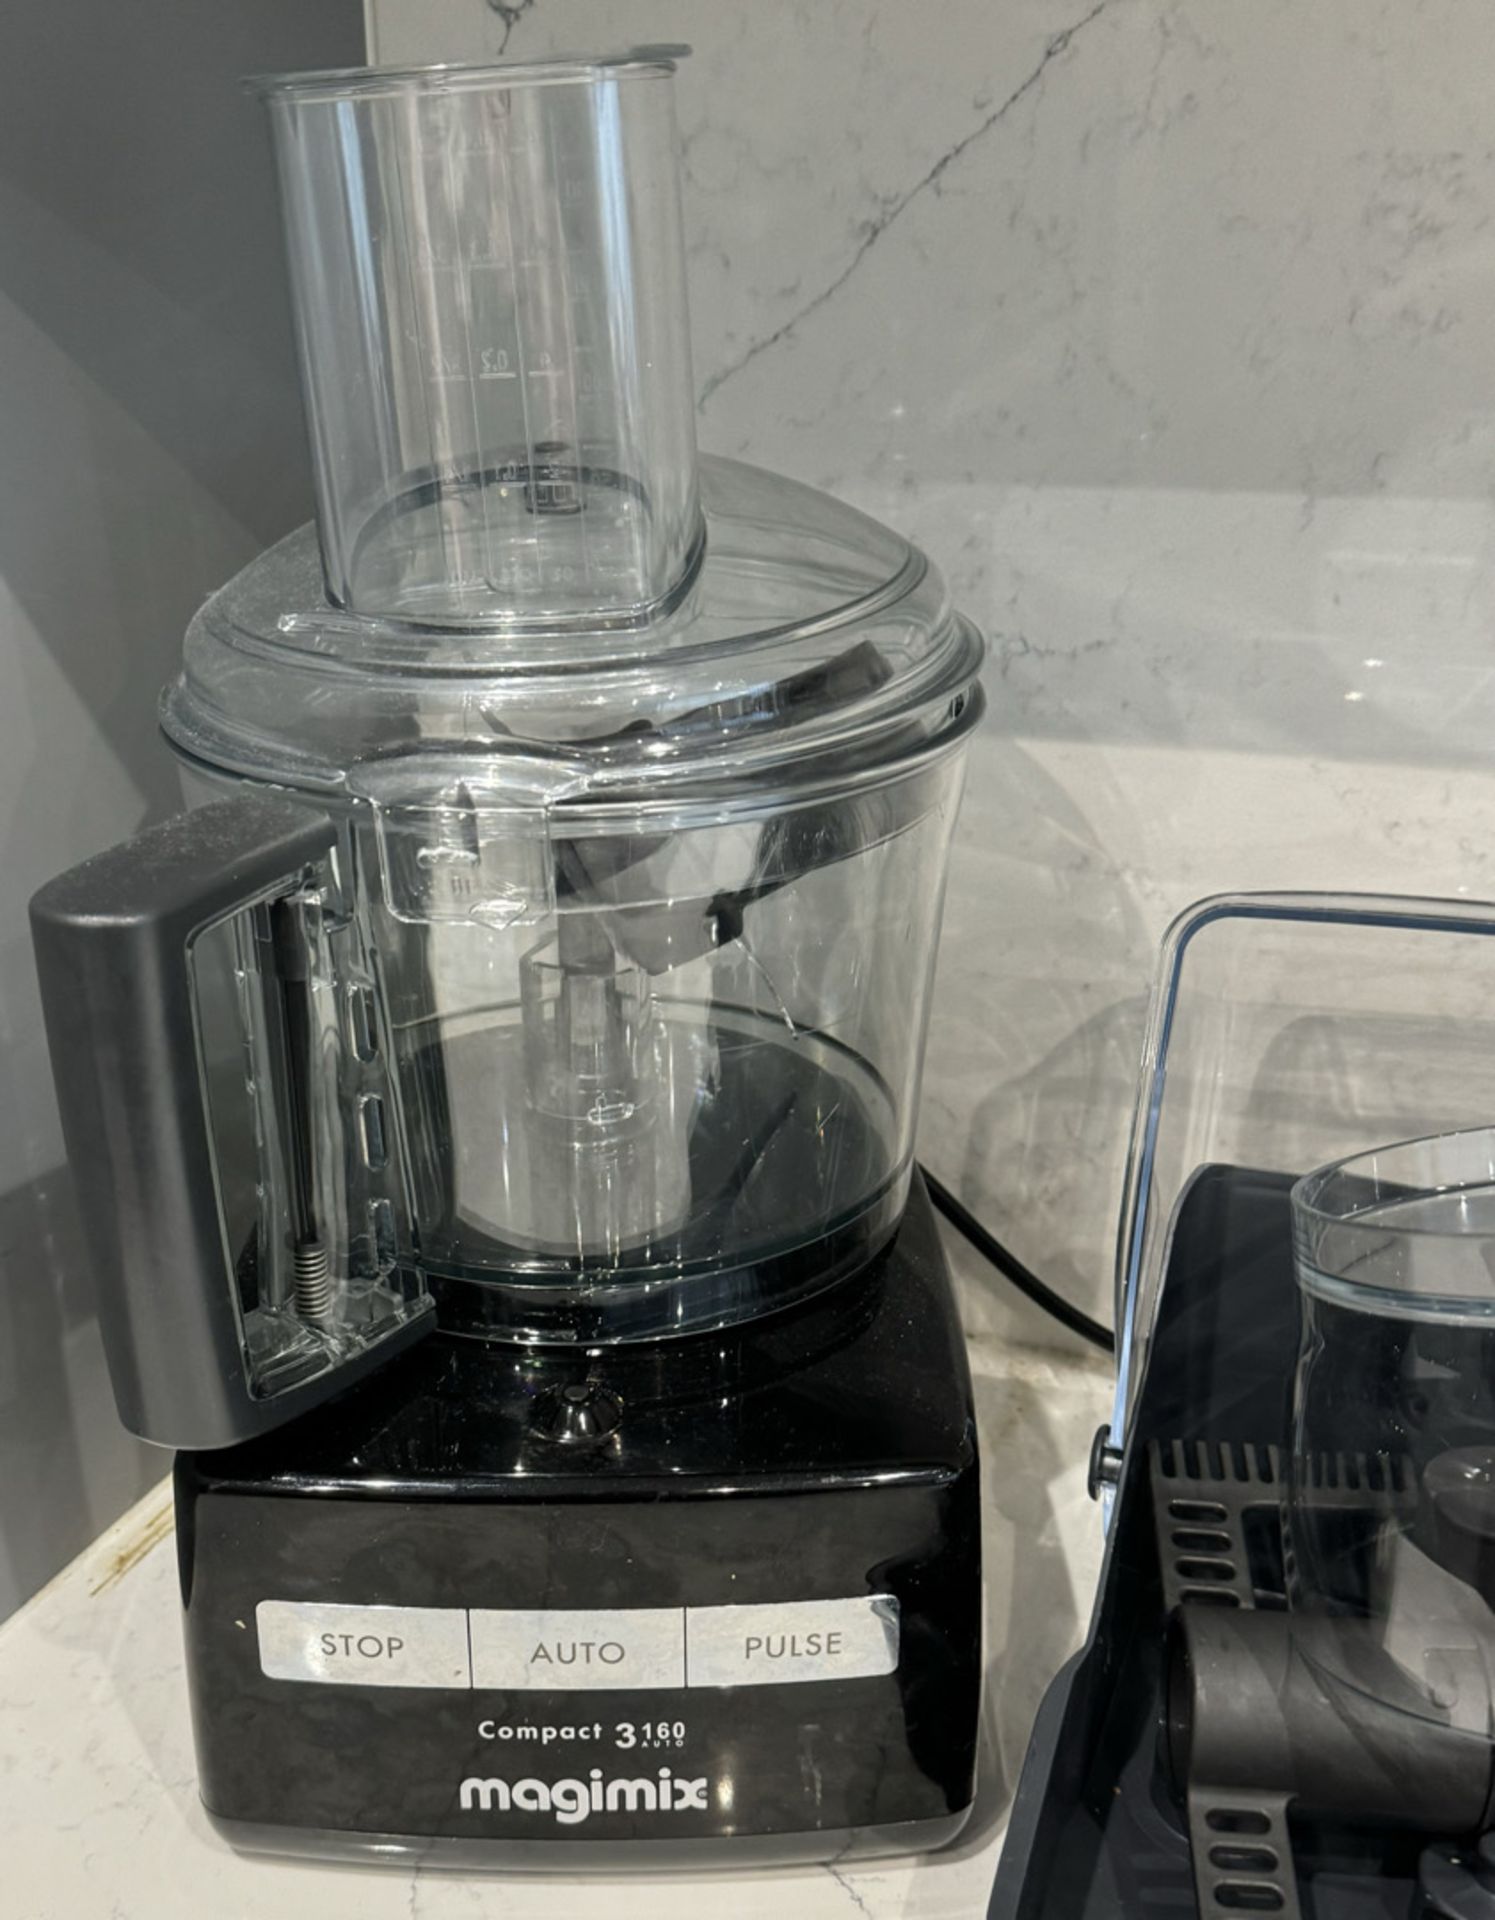 Magimix Compact 3160 Auto Food Processor with Accessories and Recipe Book - Black Model - NO VAT ! - Image 3 of 6